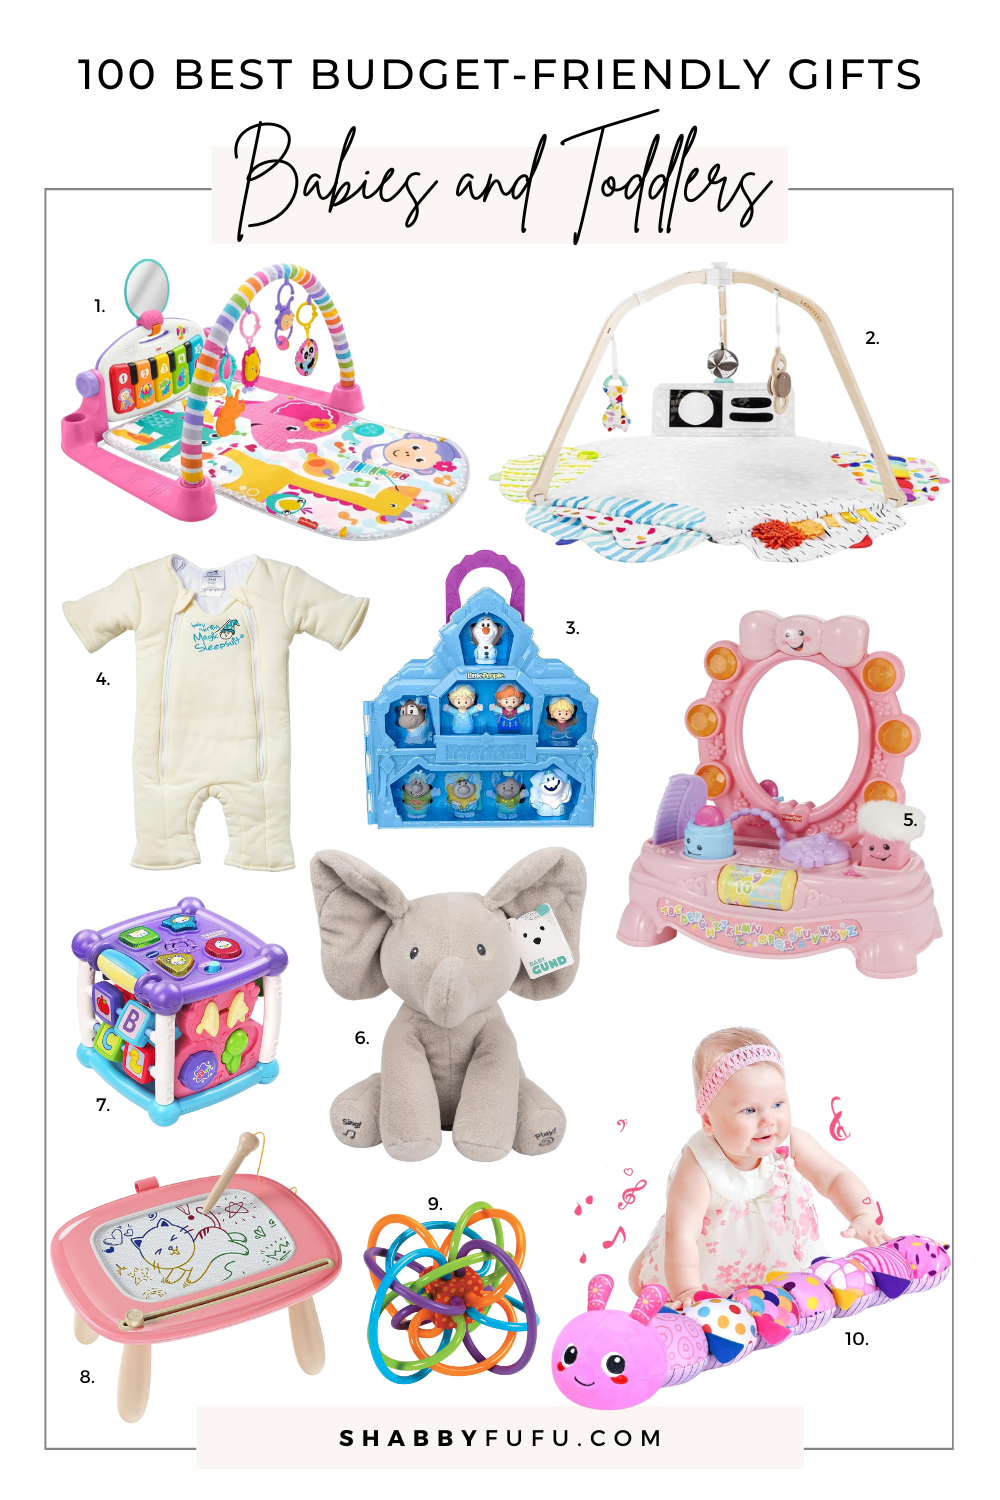 Collage image featuring different products titled "100 Best Budget Friendly Holiday Gifts For Babies and Toddlers"